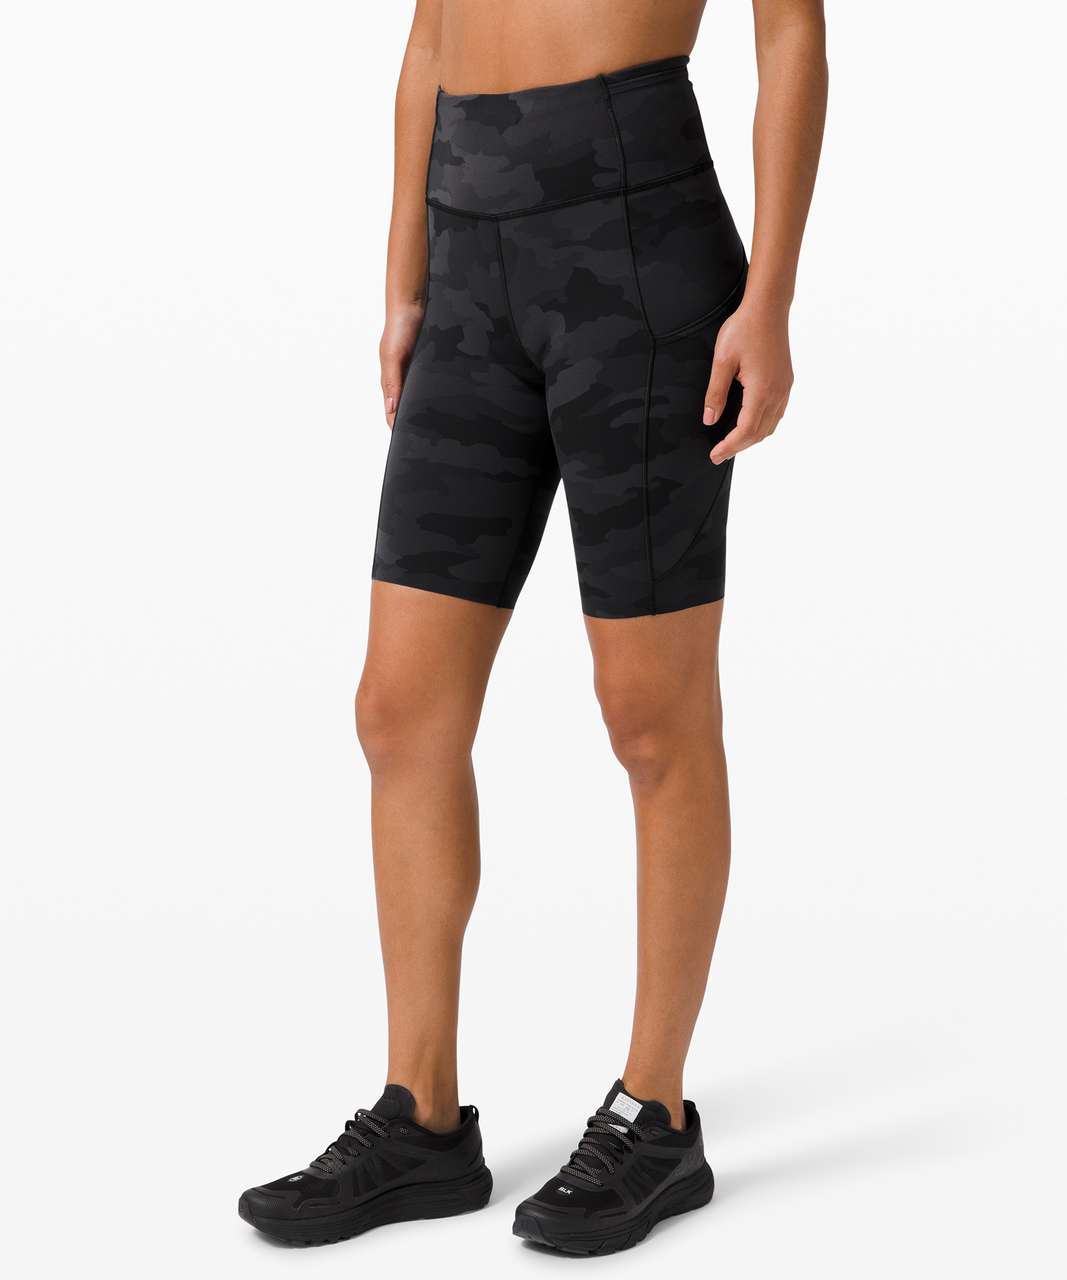 Lululemon Fast And Free Short 10 *Non-Reflective - Formation Camo